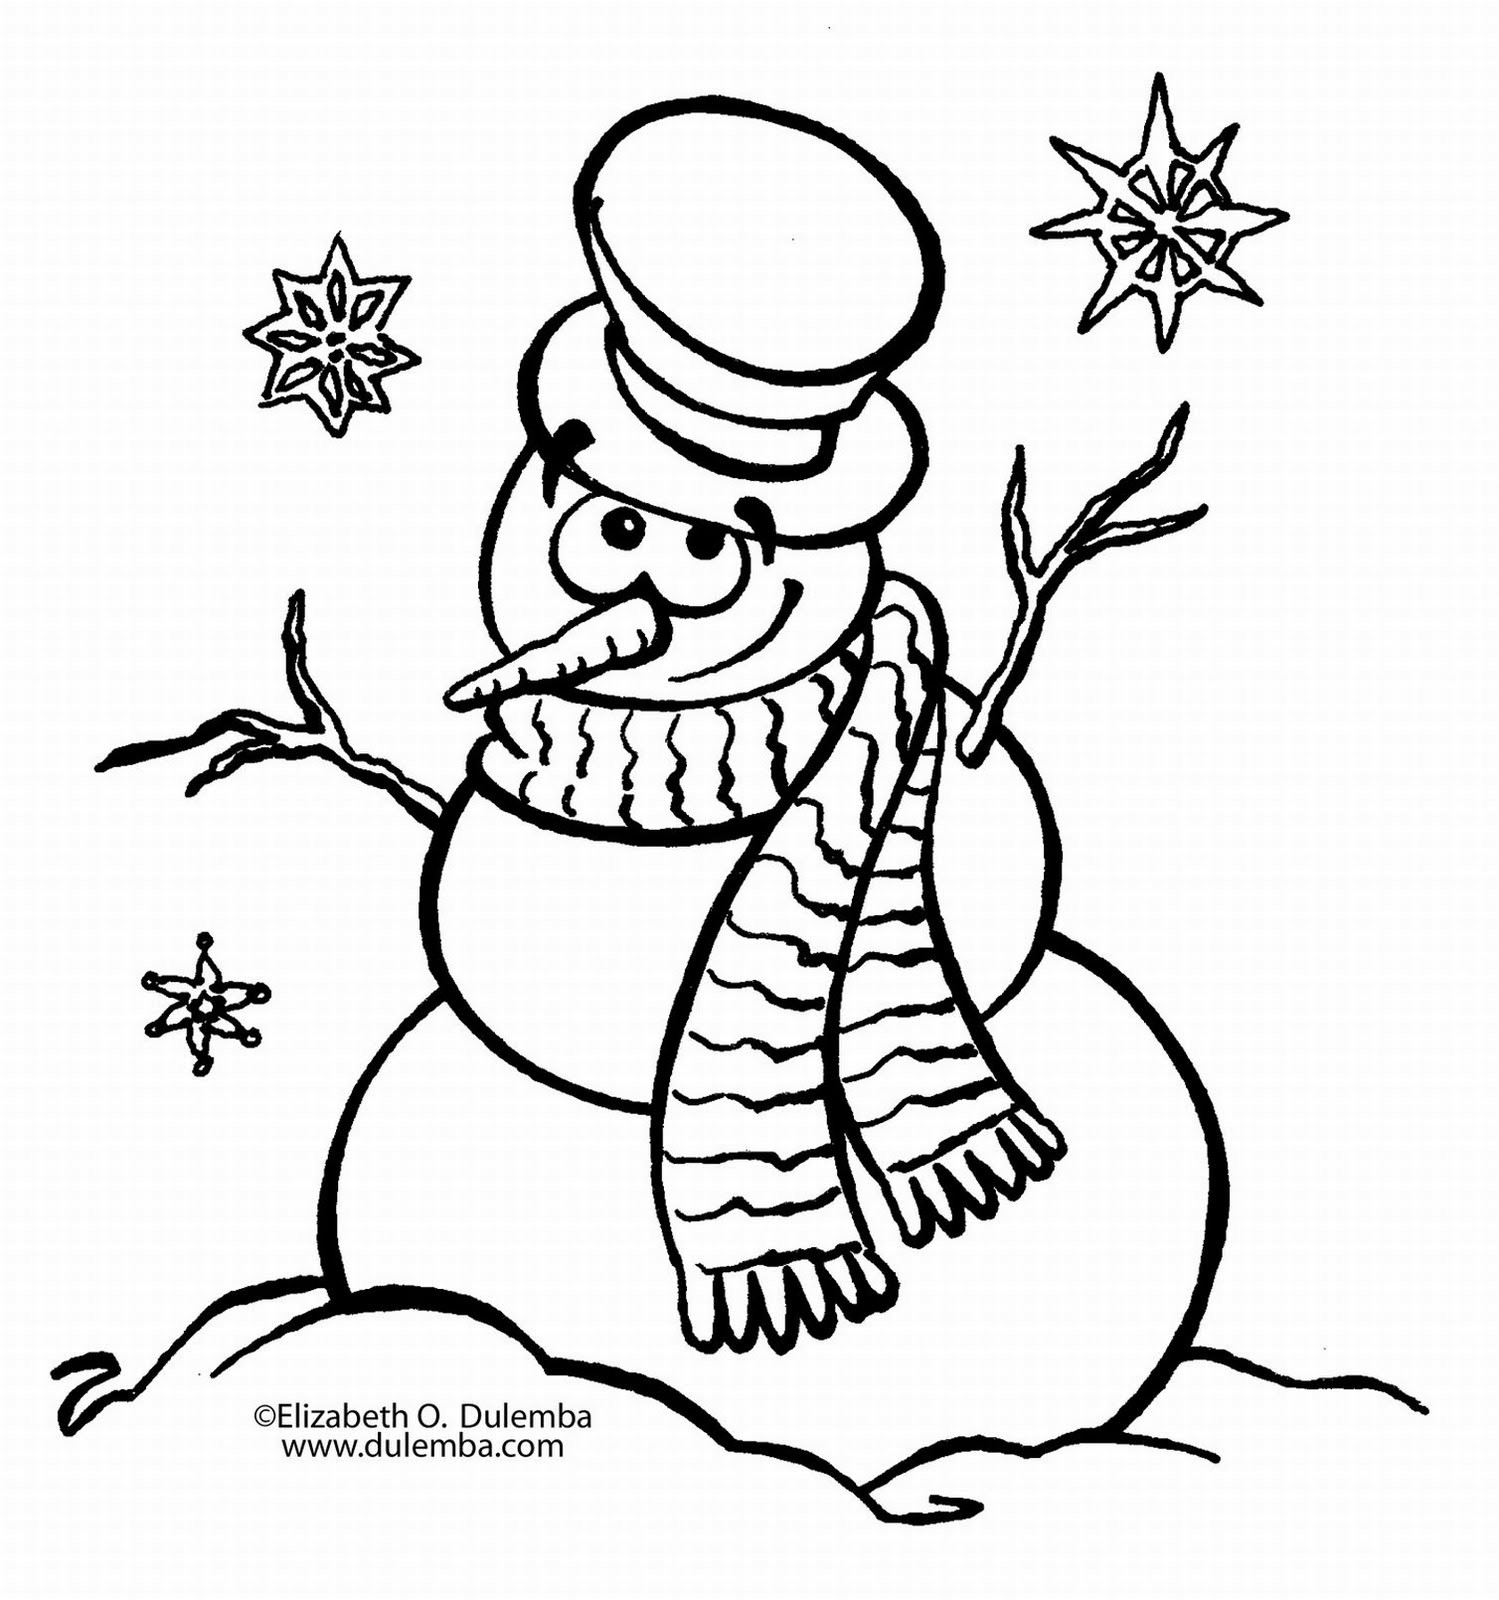 Snowman Printable Coloring Pages
 New Year Coloring Pages